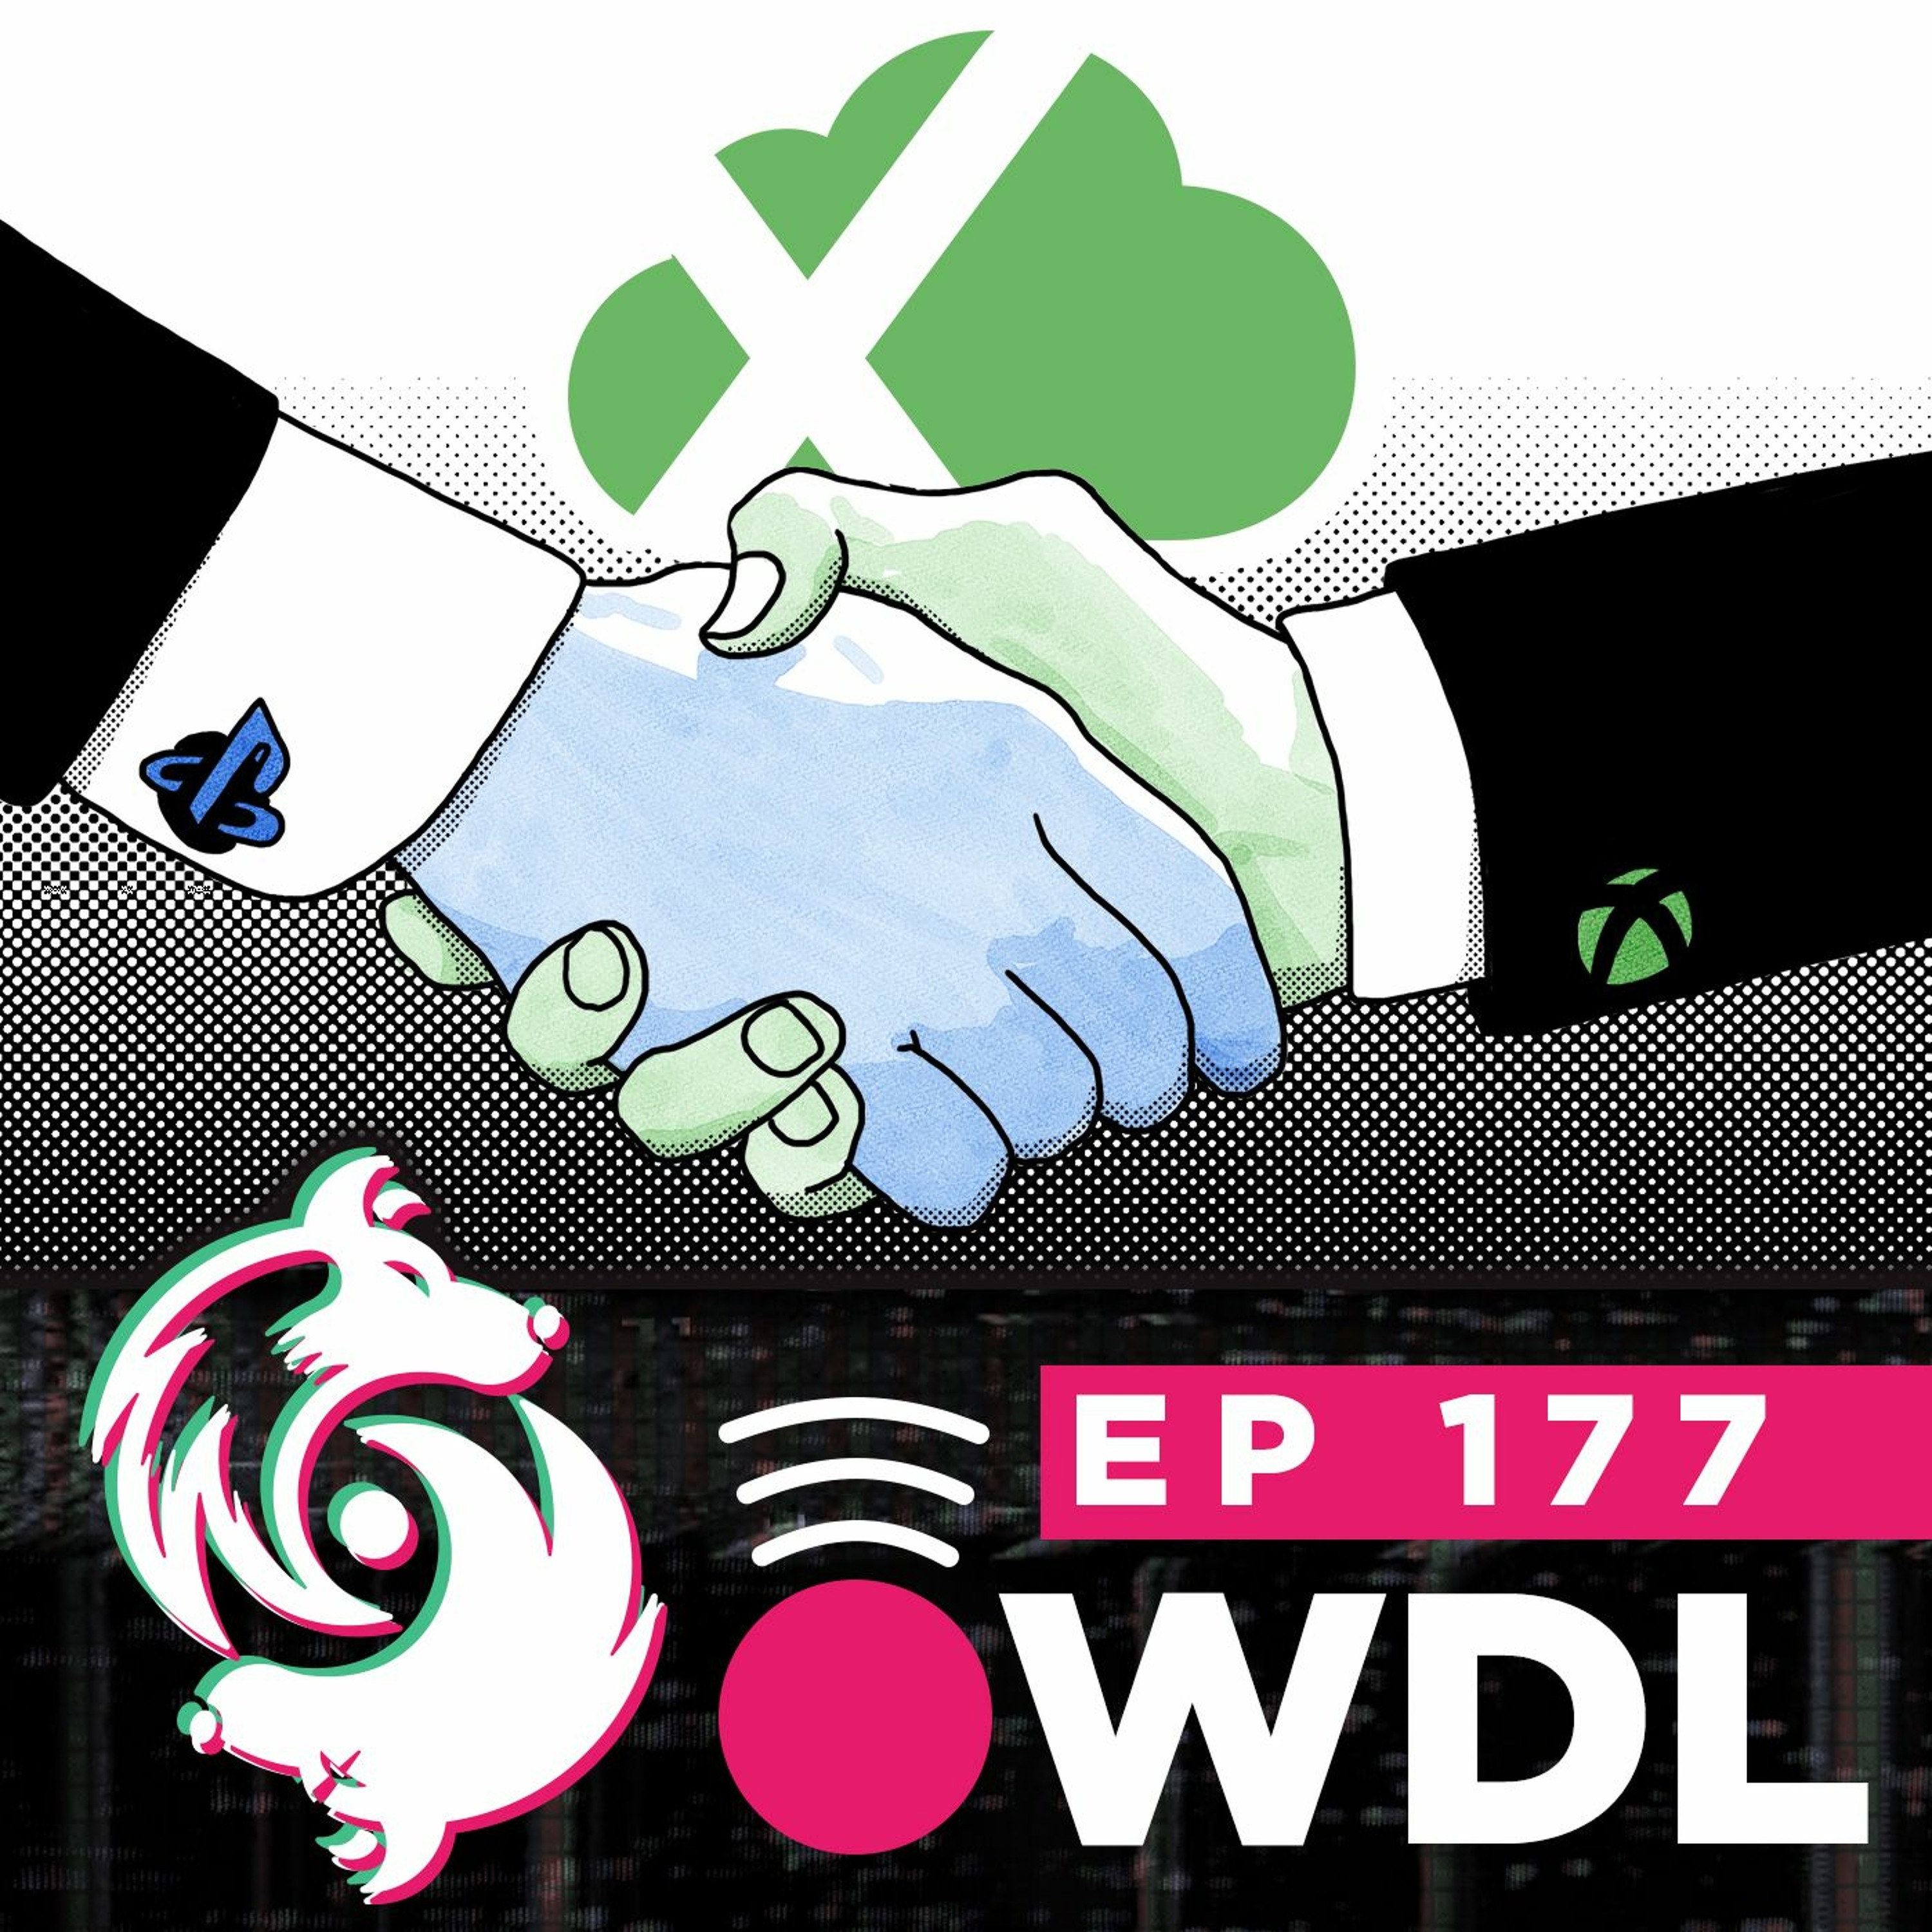 What this Sony and Microsoft cloud gaming partnership is REALLY for - WDL Ep 177